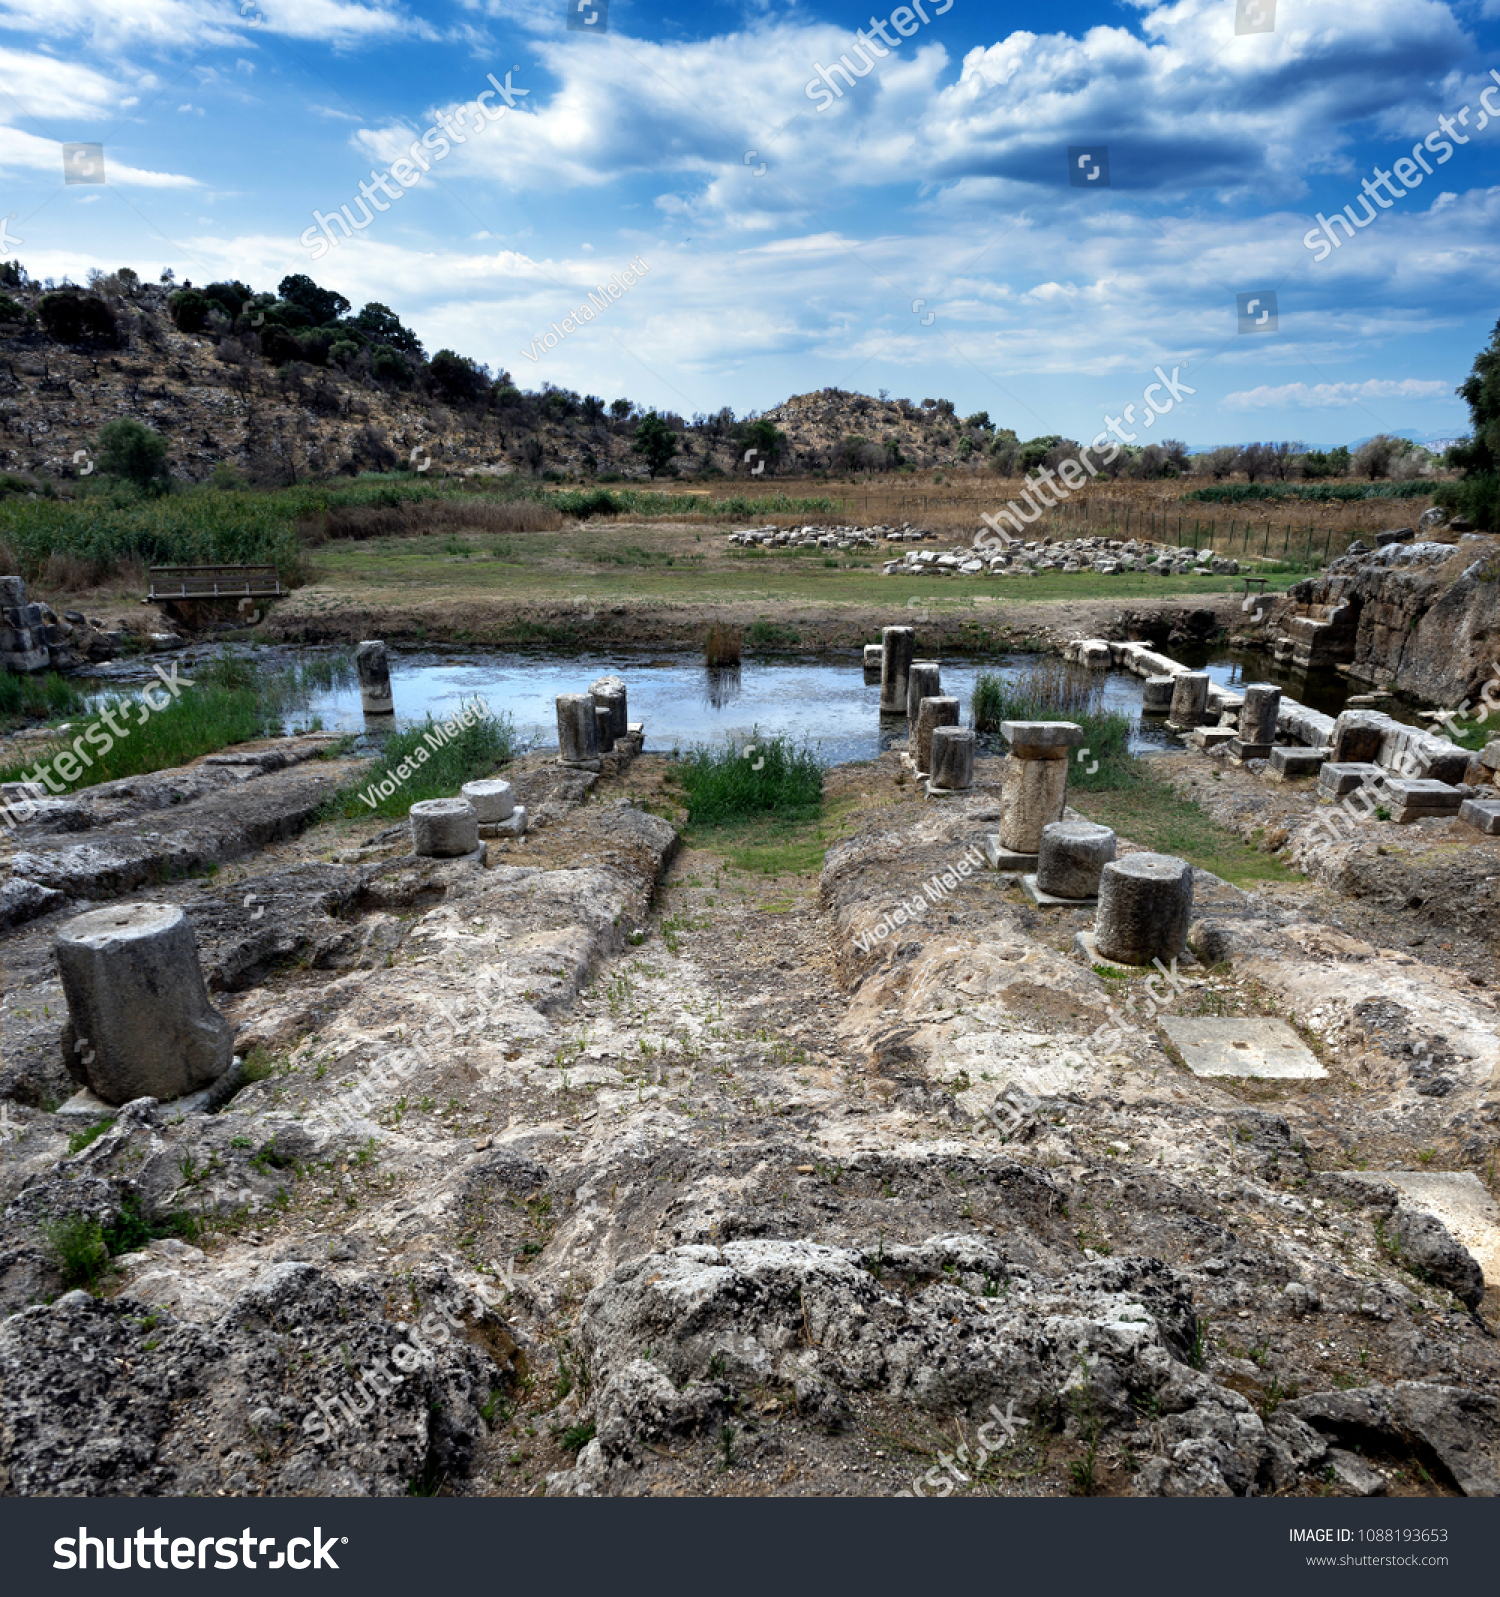 Ancient Greece, ruins of the harbor in town Oiniades #1088193653